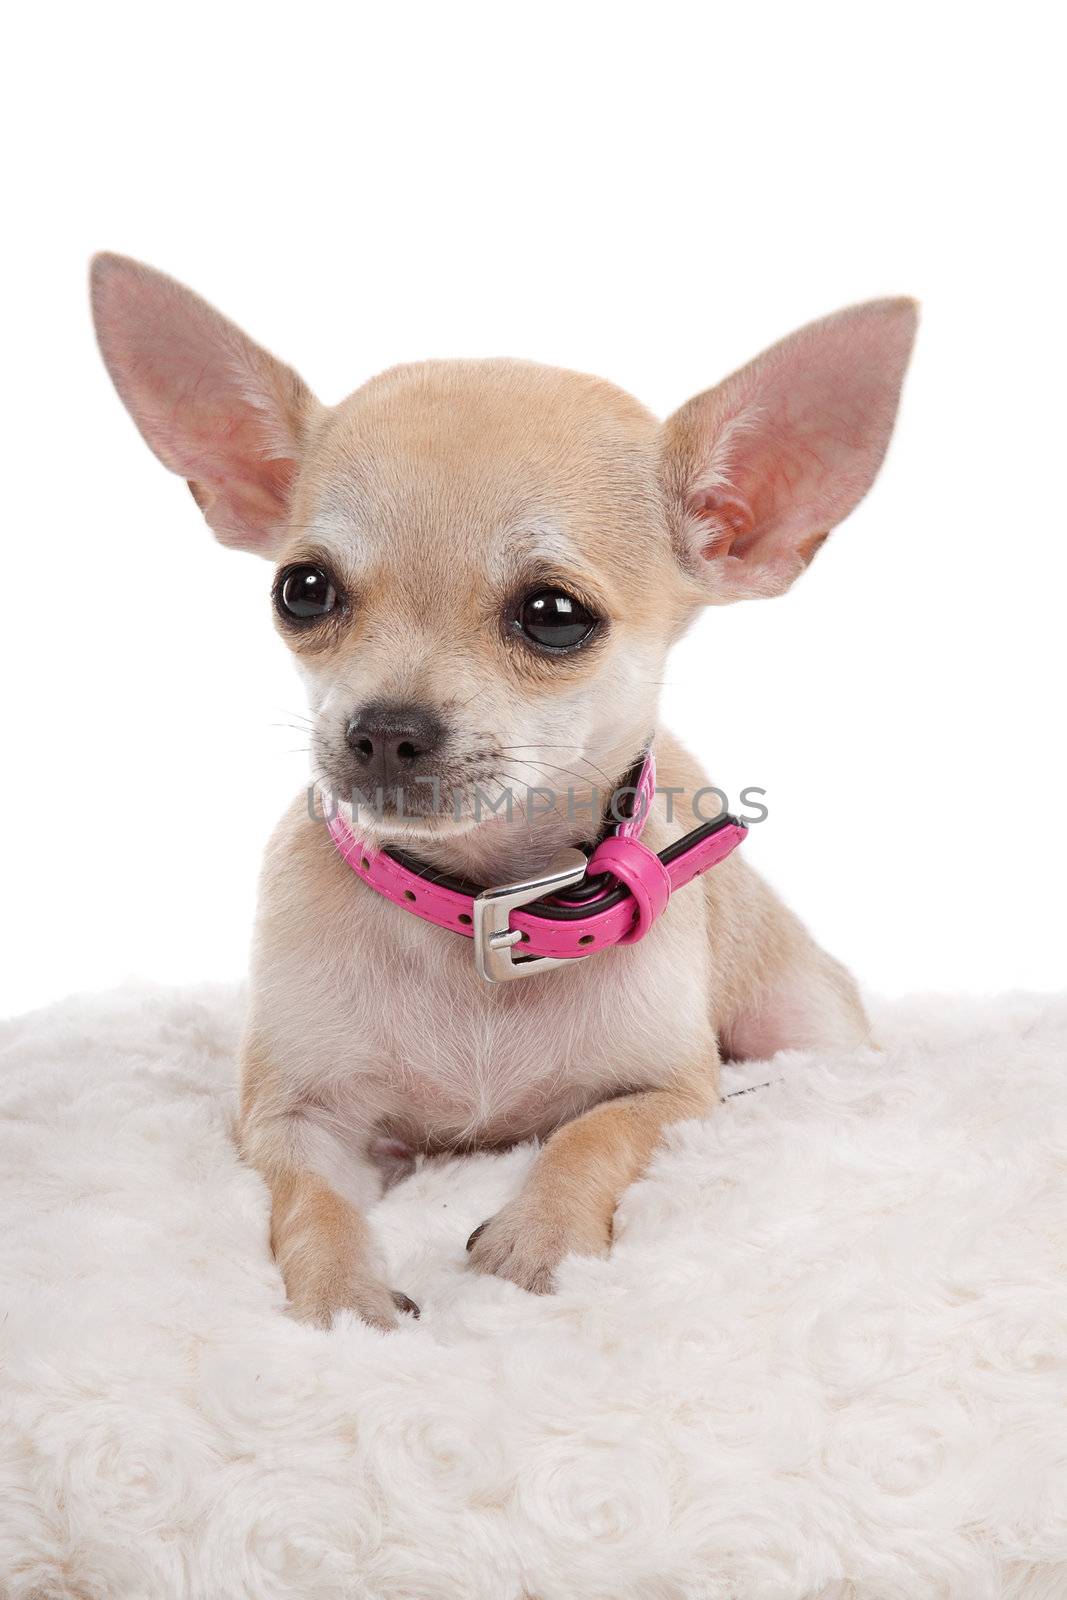 chihuahua dog in front of a white background